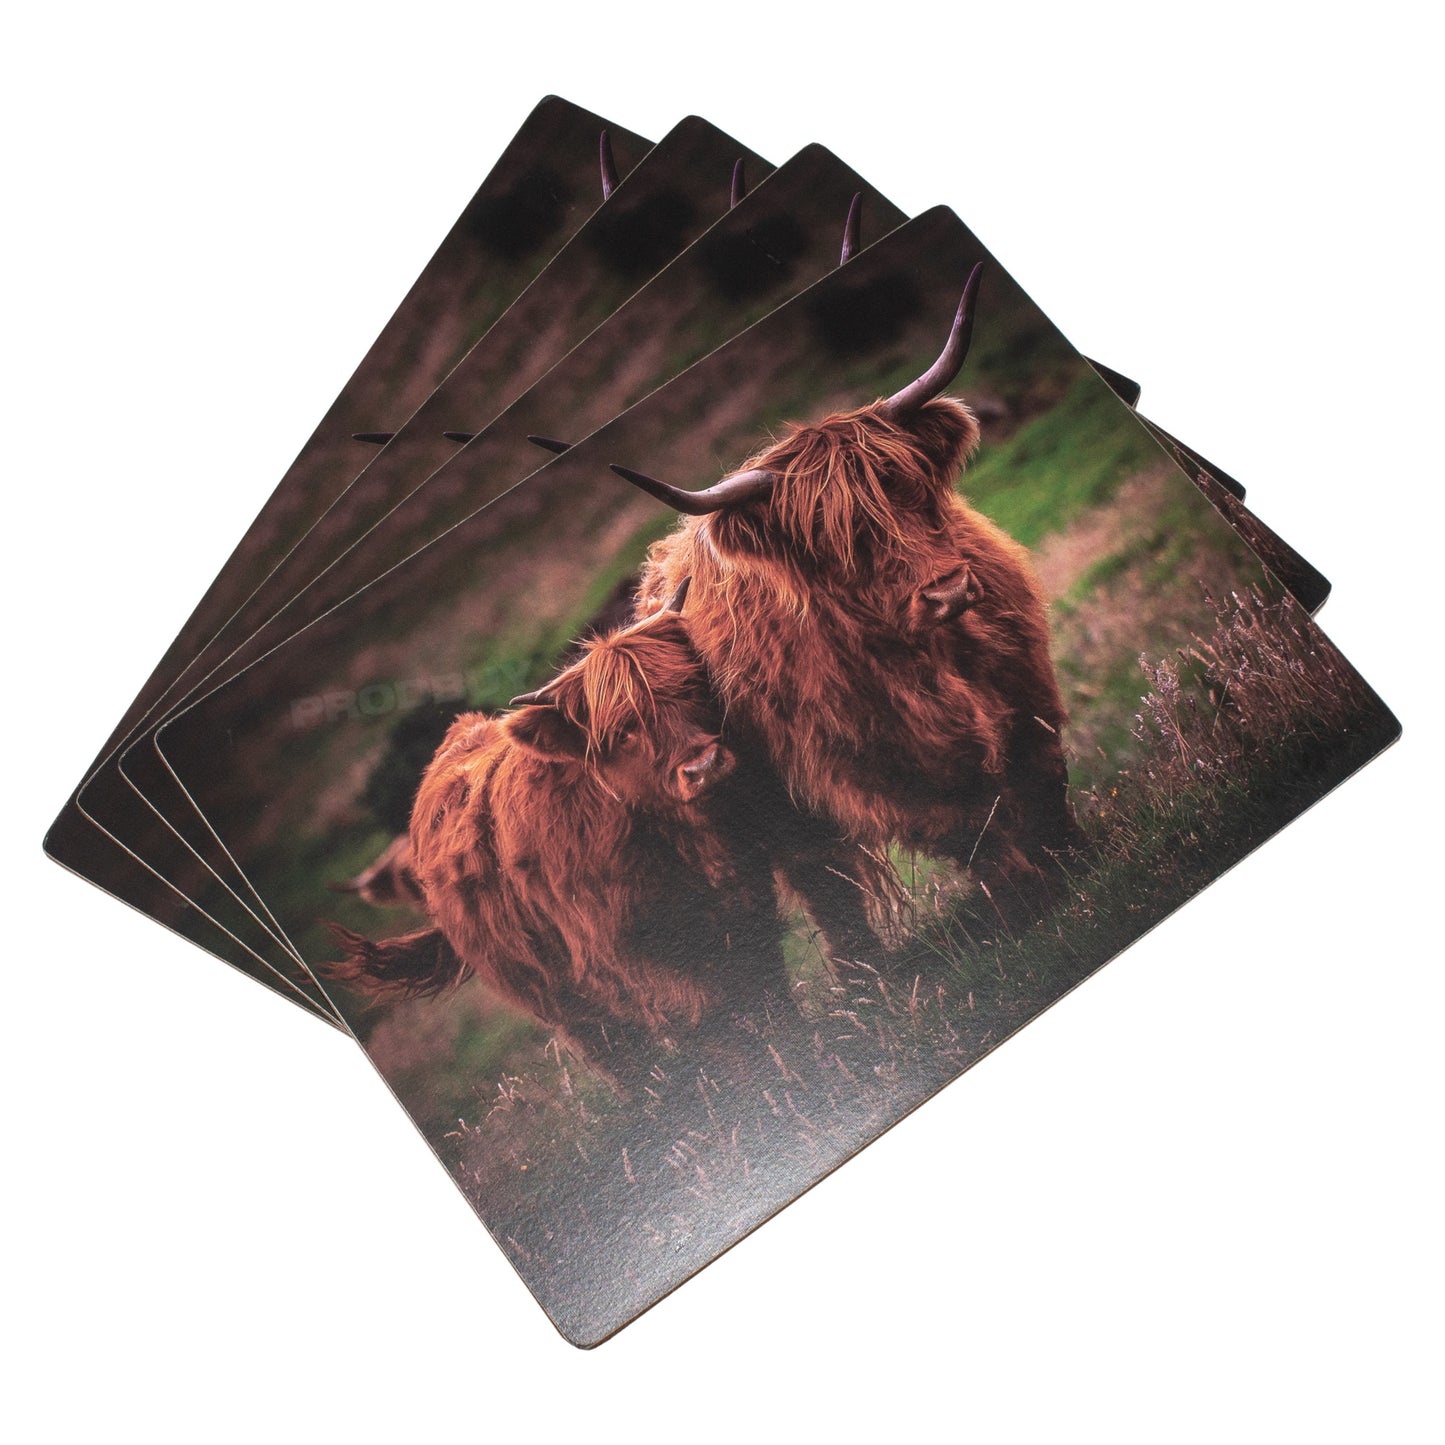 Set of 4 Placemats & 4 Coasters with Highland Cows